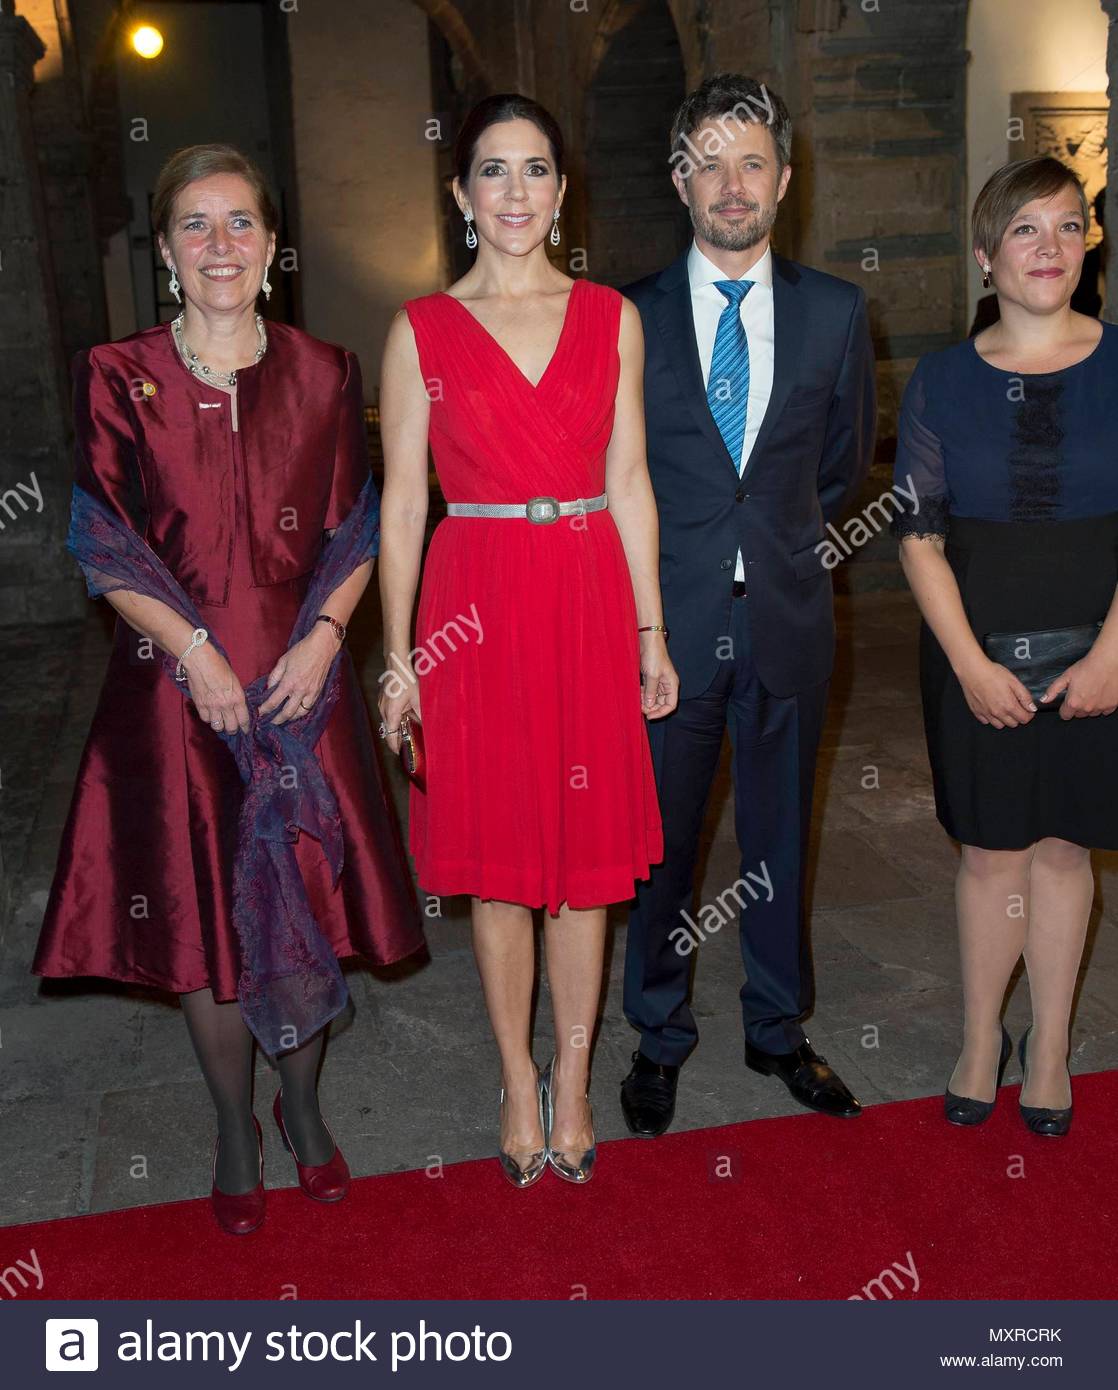 crown-prince-frederik-and-crown-princess-mary-no-internet-until-november-21-2013-crown-prince-frederik-and-crown-princess-mary-on-an-official-visit-to-mexico-crown-prince-couple-a-gala-dinner-hosted-by-the-danish-ambassador-at-the-ex-convento-de-san-hipolito-in-mexico-city-november-12-2013-code-04053mh-MXRCRK.jpg